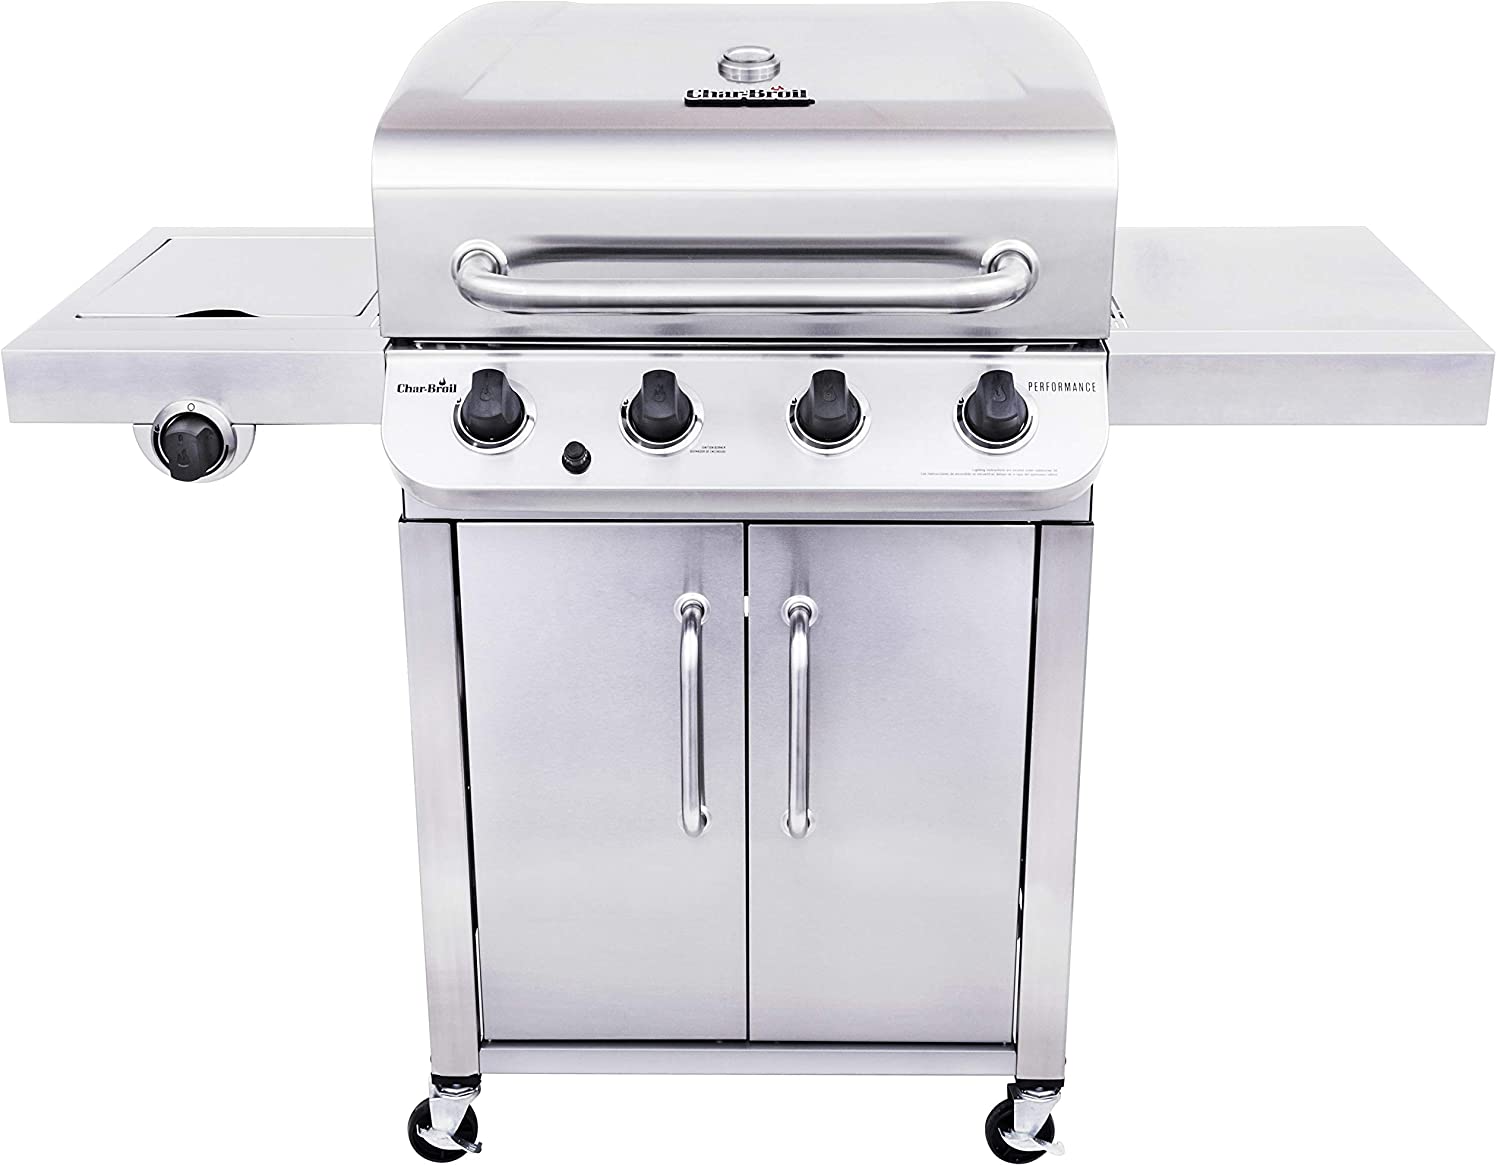 Char-Broil 463375919 Performance Stainless Steel 4-Burner Cabinet Style Char Broil 4 Burner Stainless Steel Gas Grill